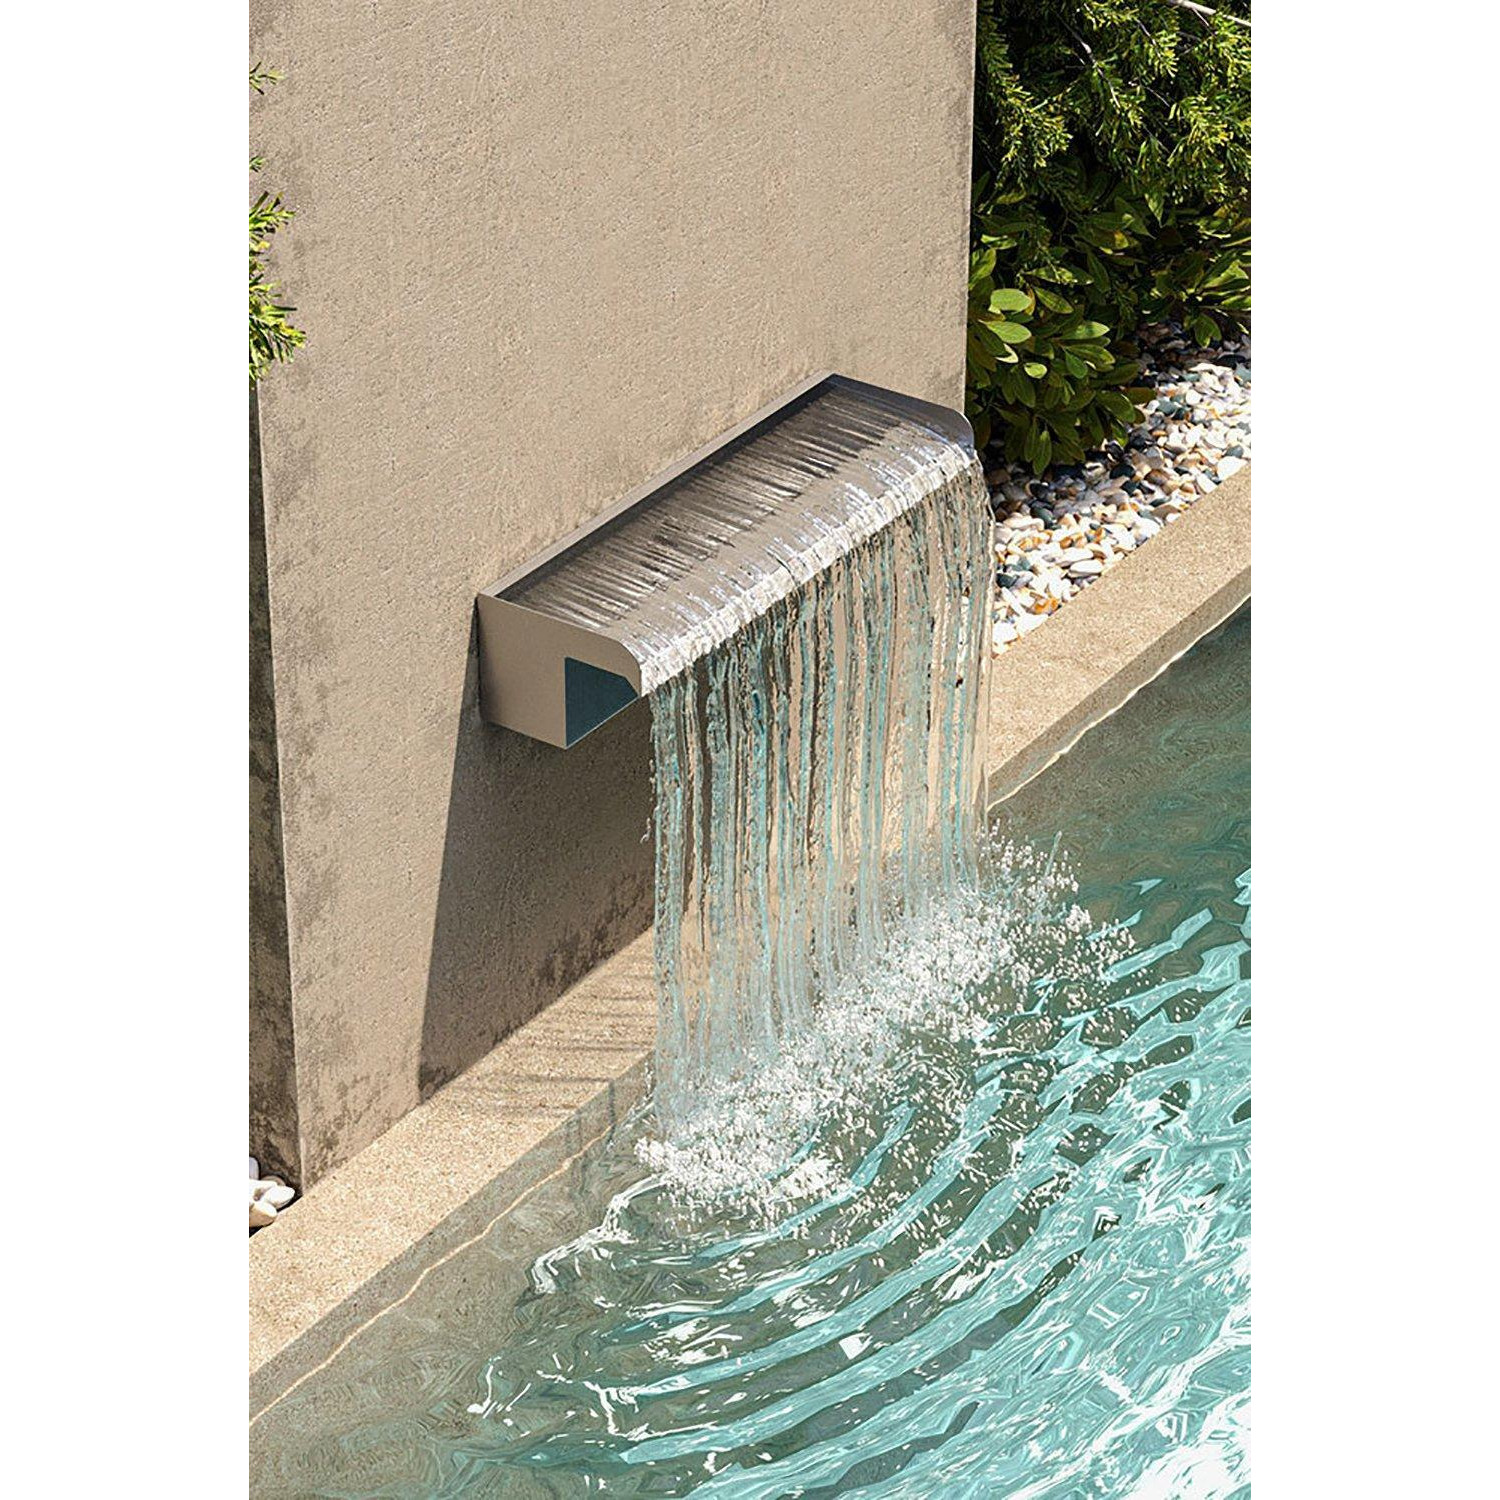 30cm Back Entry Waterfall Pool Fountain Garden Stainless Steel Wall-Mounted Water Blade - image 1